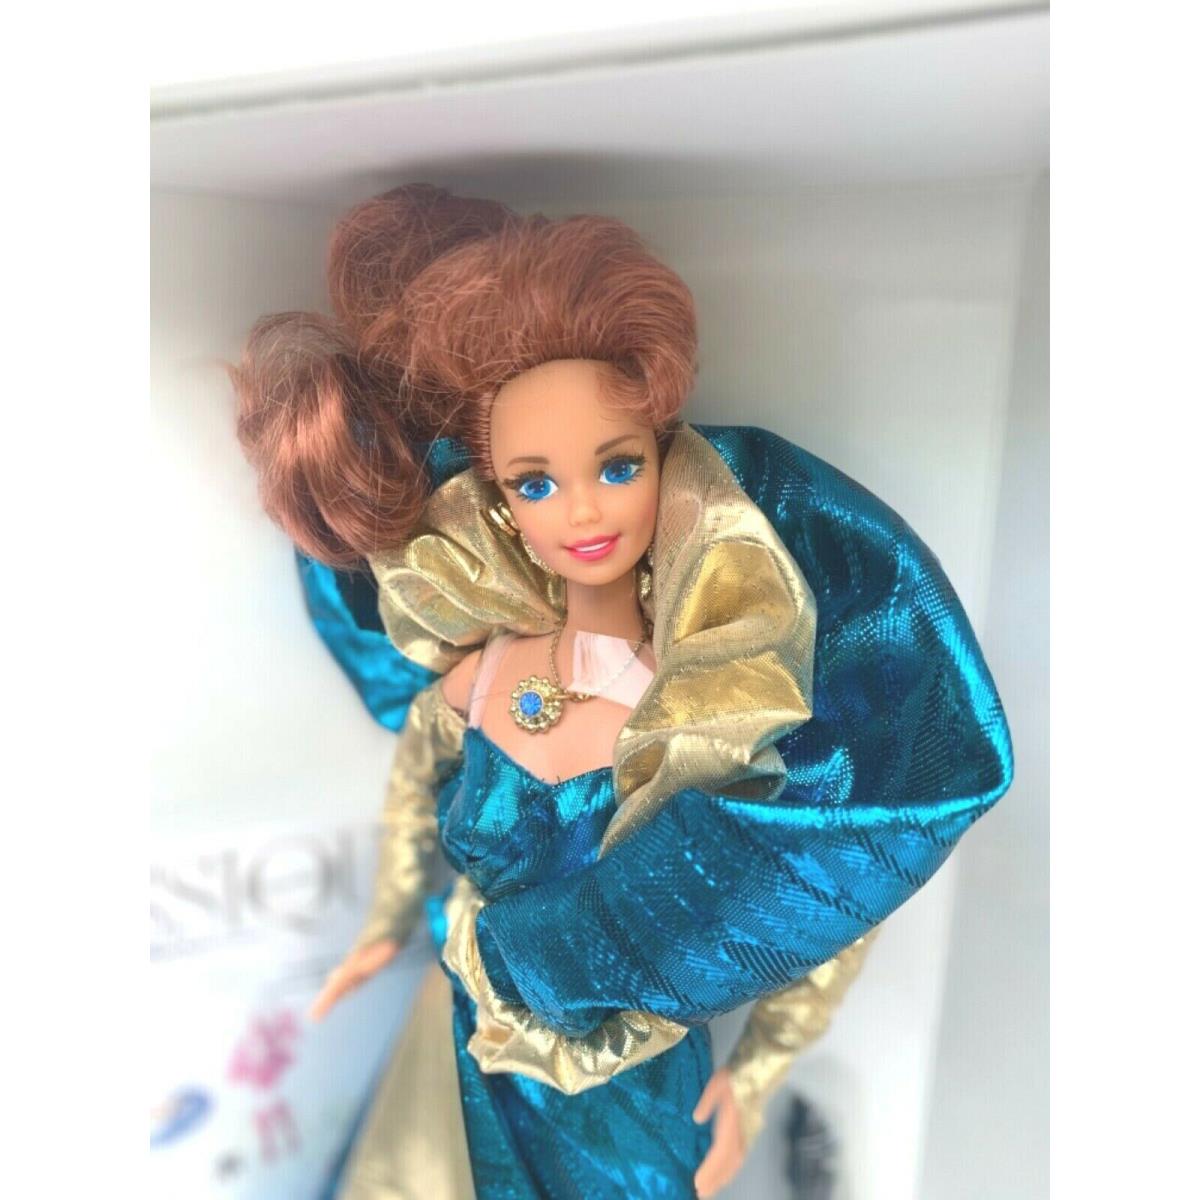 Benefit Ball Barbie Doll First In The Series Of Exclusive Limited Edition 1993